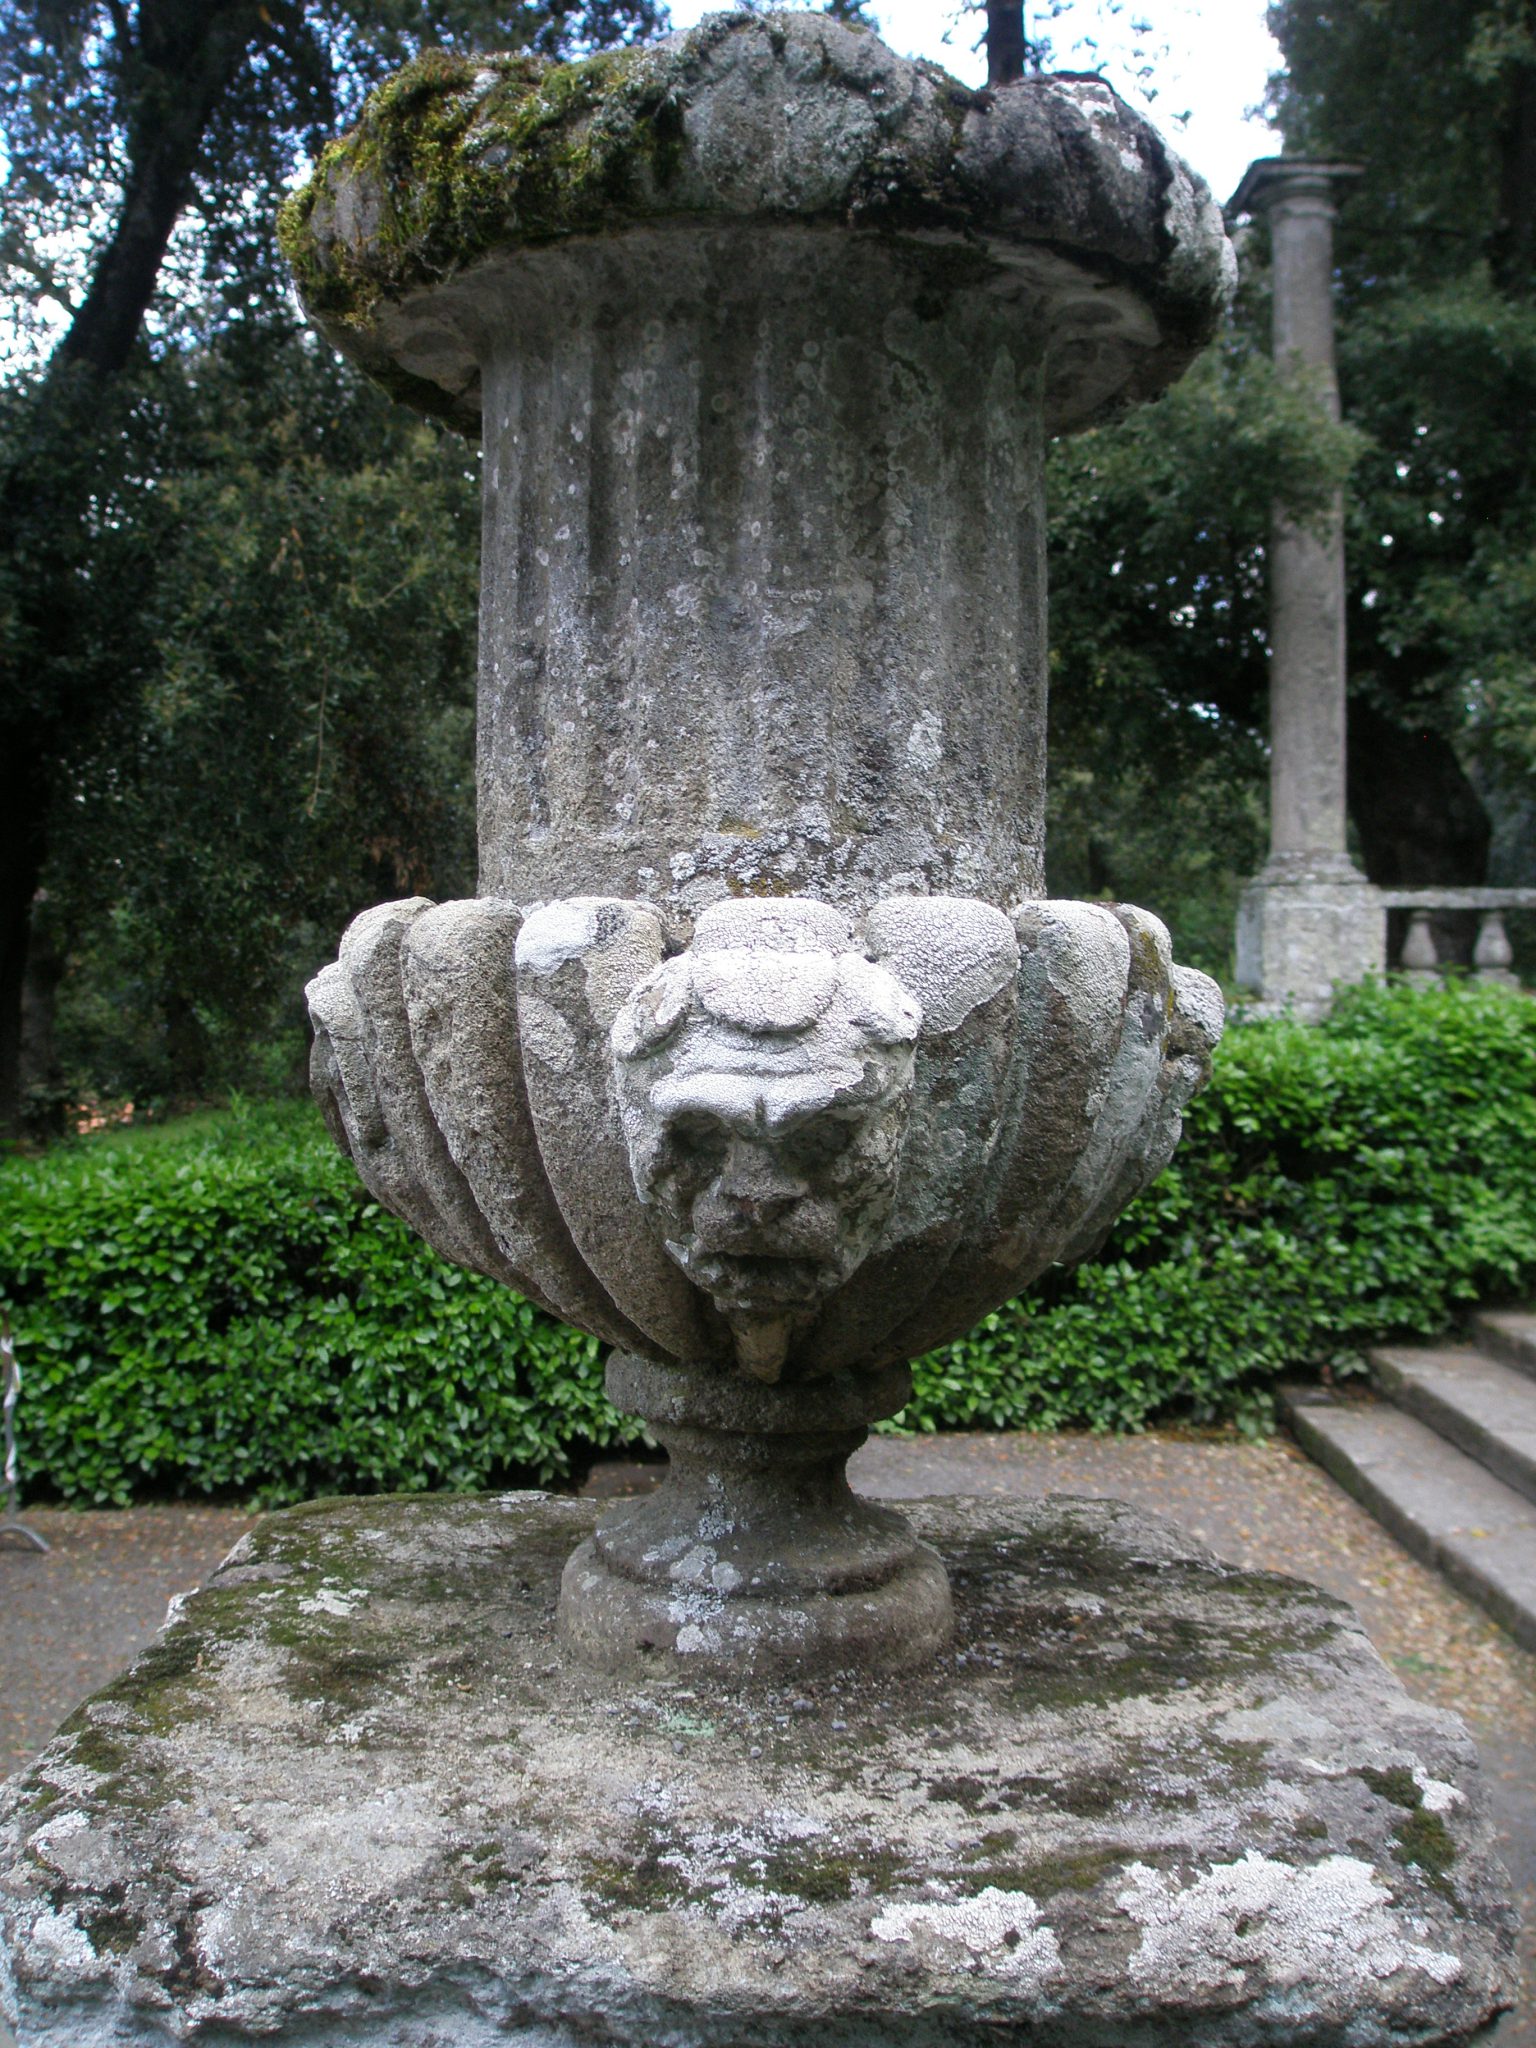 Urn near the Fountain of the Dolphins